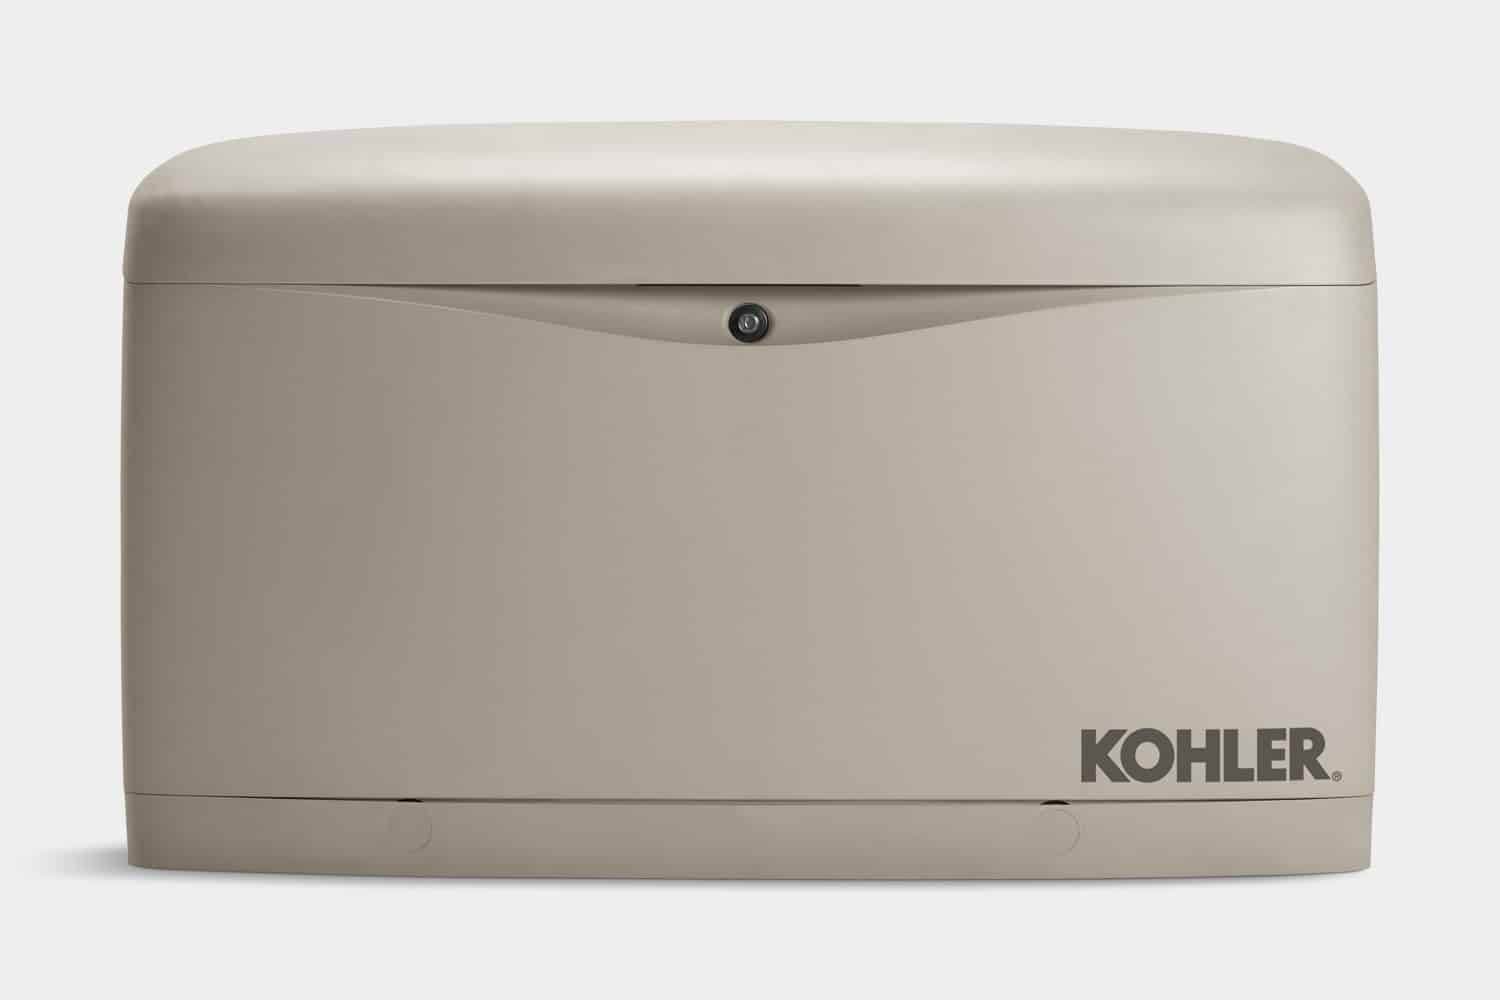 New 20 kW Kohler 20RCA Residential Natural Gas Generator – AVAILABLE